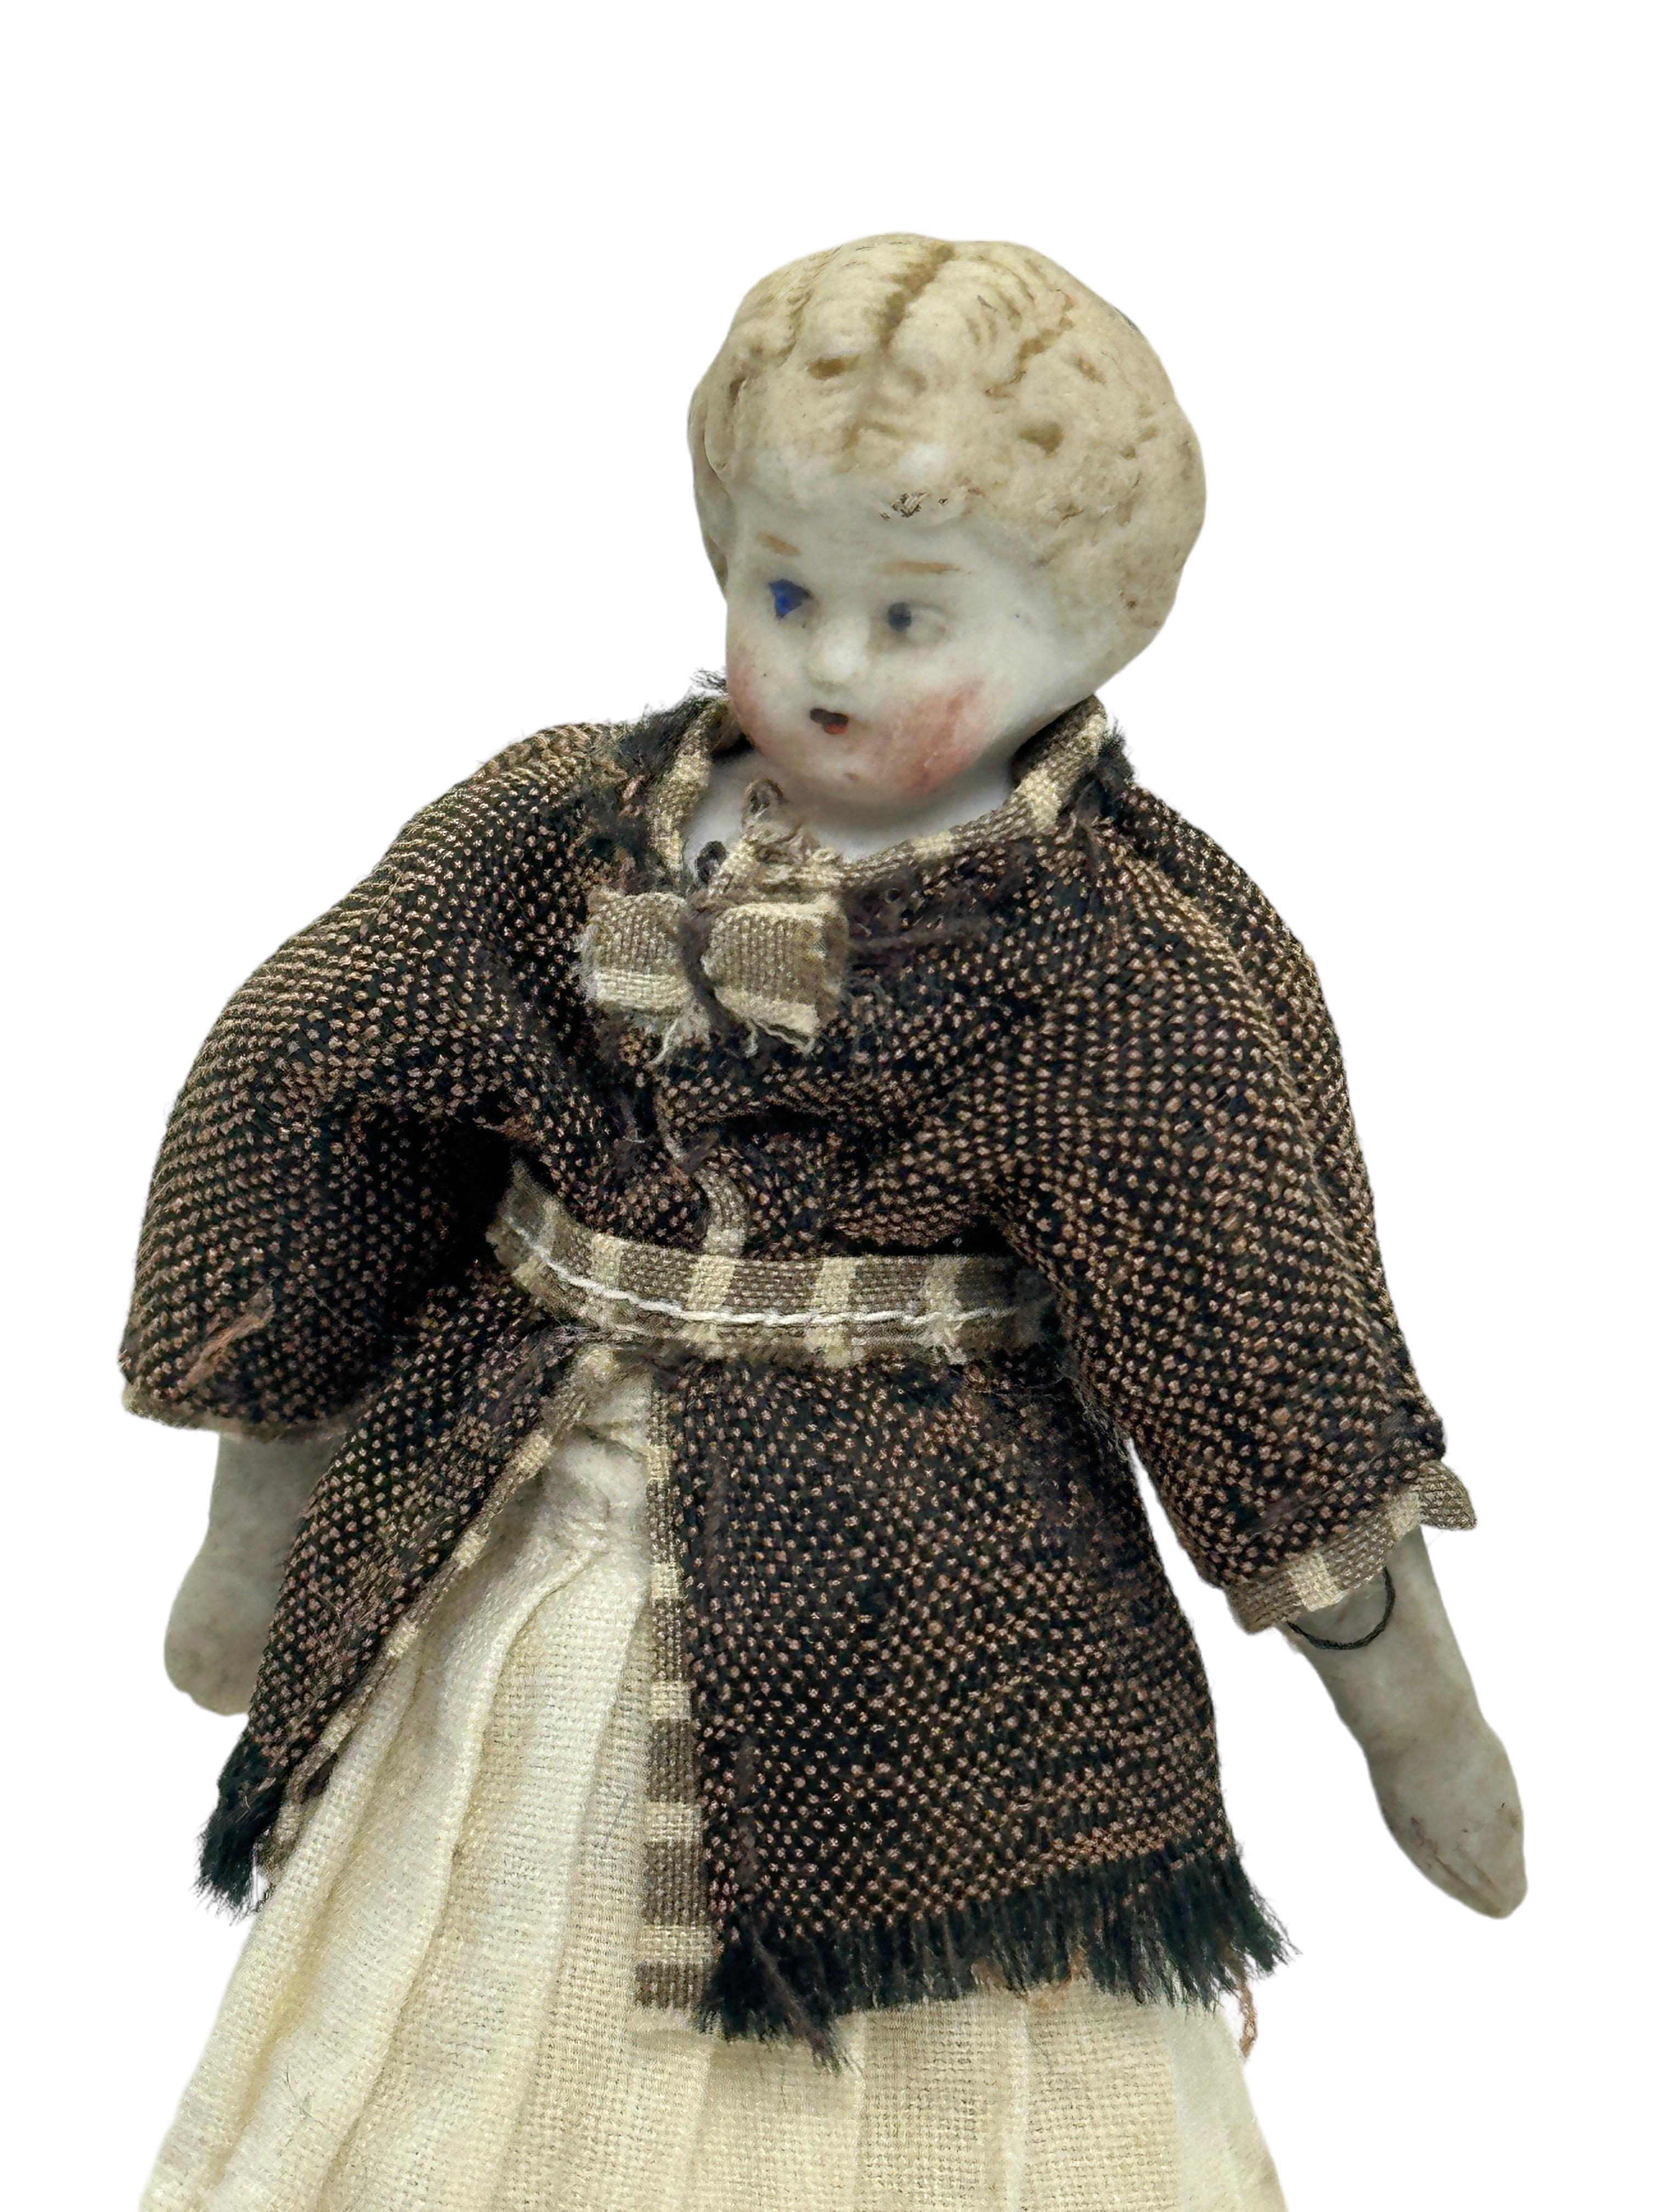 Porcelain Girl in beautiful Dress, Antique German Dollhouse Doll Toy 1900s For Sale